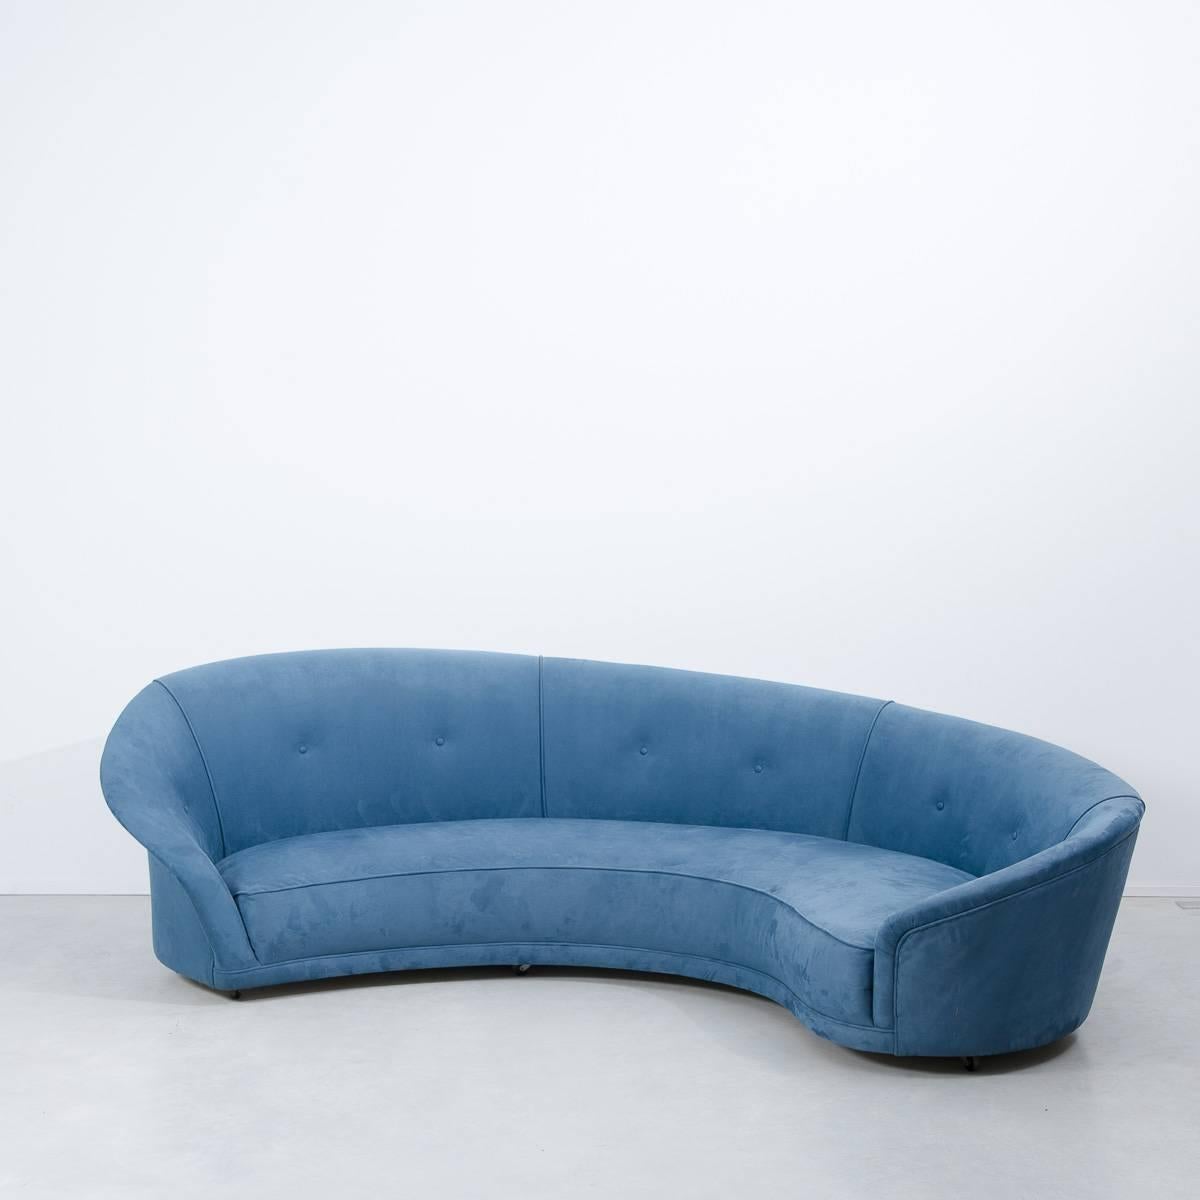 Bespoke made late 20th century curved sofa, kidney shaped in the manner of Vladimir Kagan. As far as we know, reclaimed from a theatre and reupholstered within the last decade with blue alcantara (a luxury suedette). 

Low sprung seat,